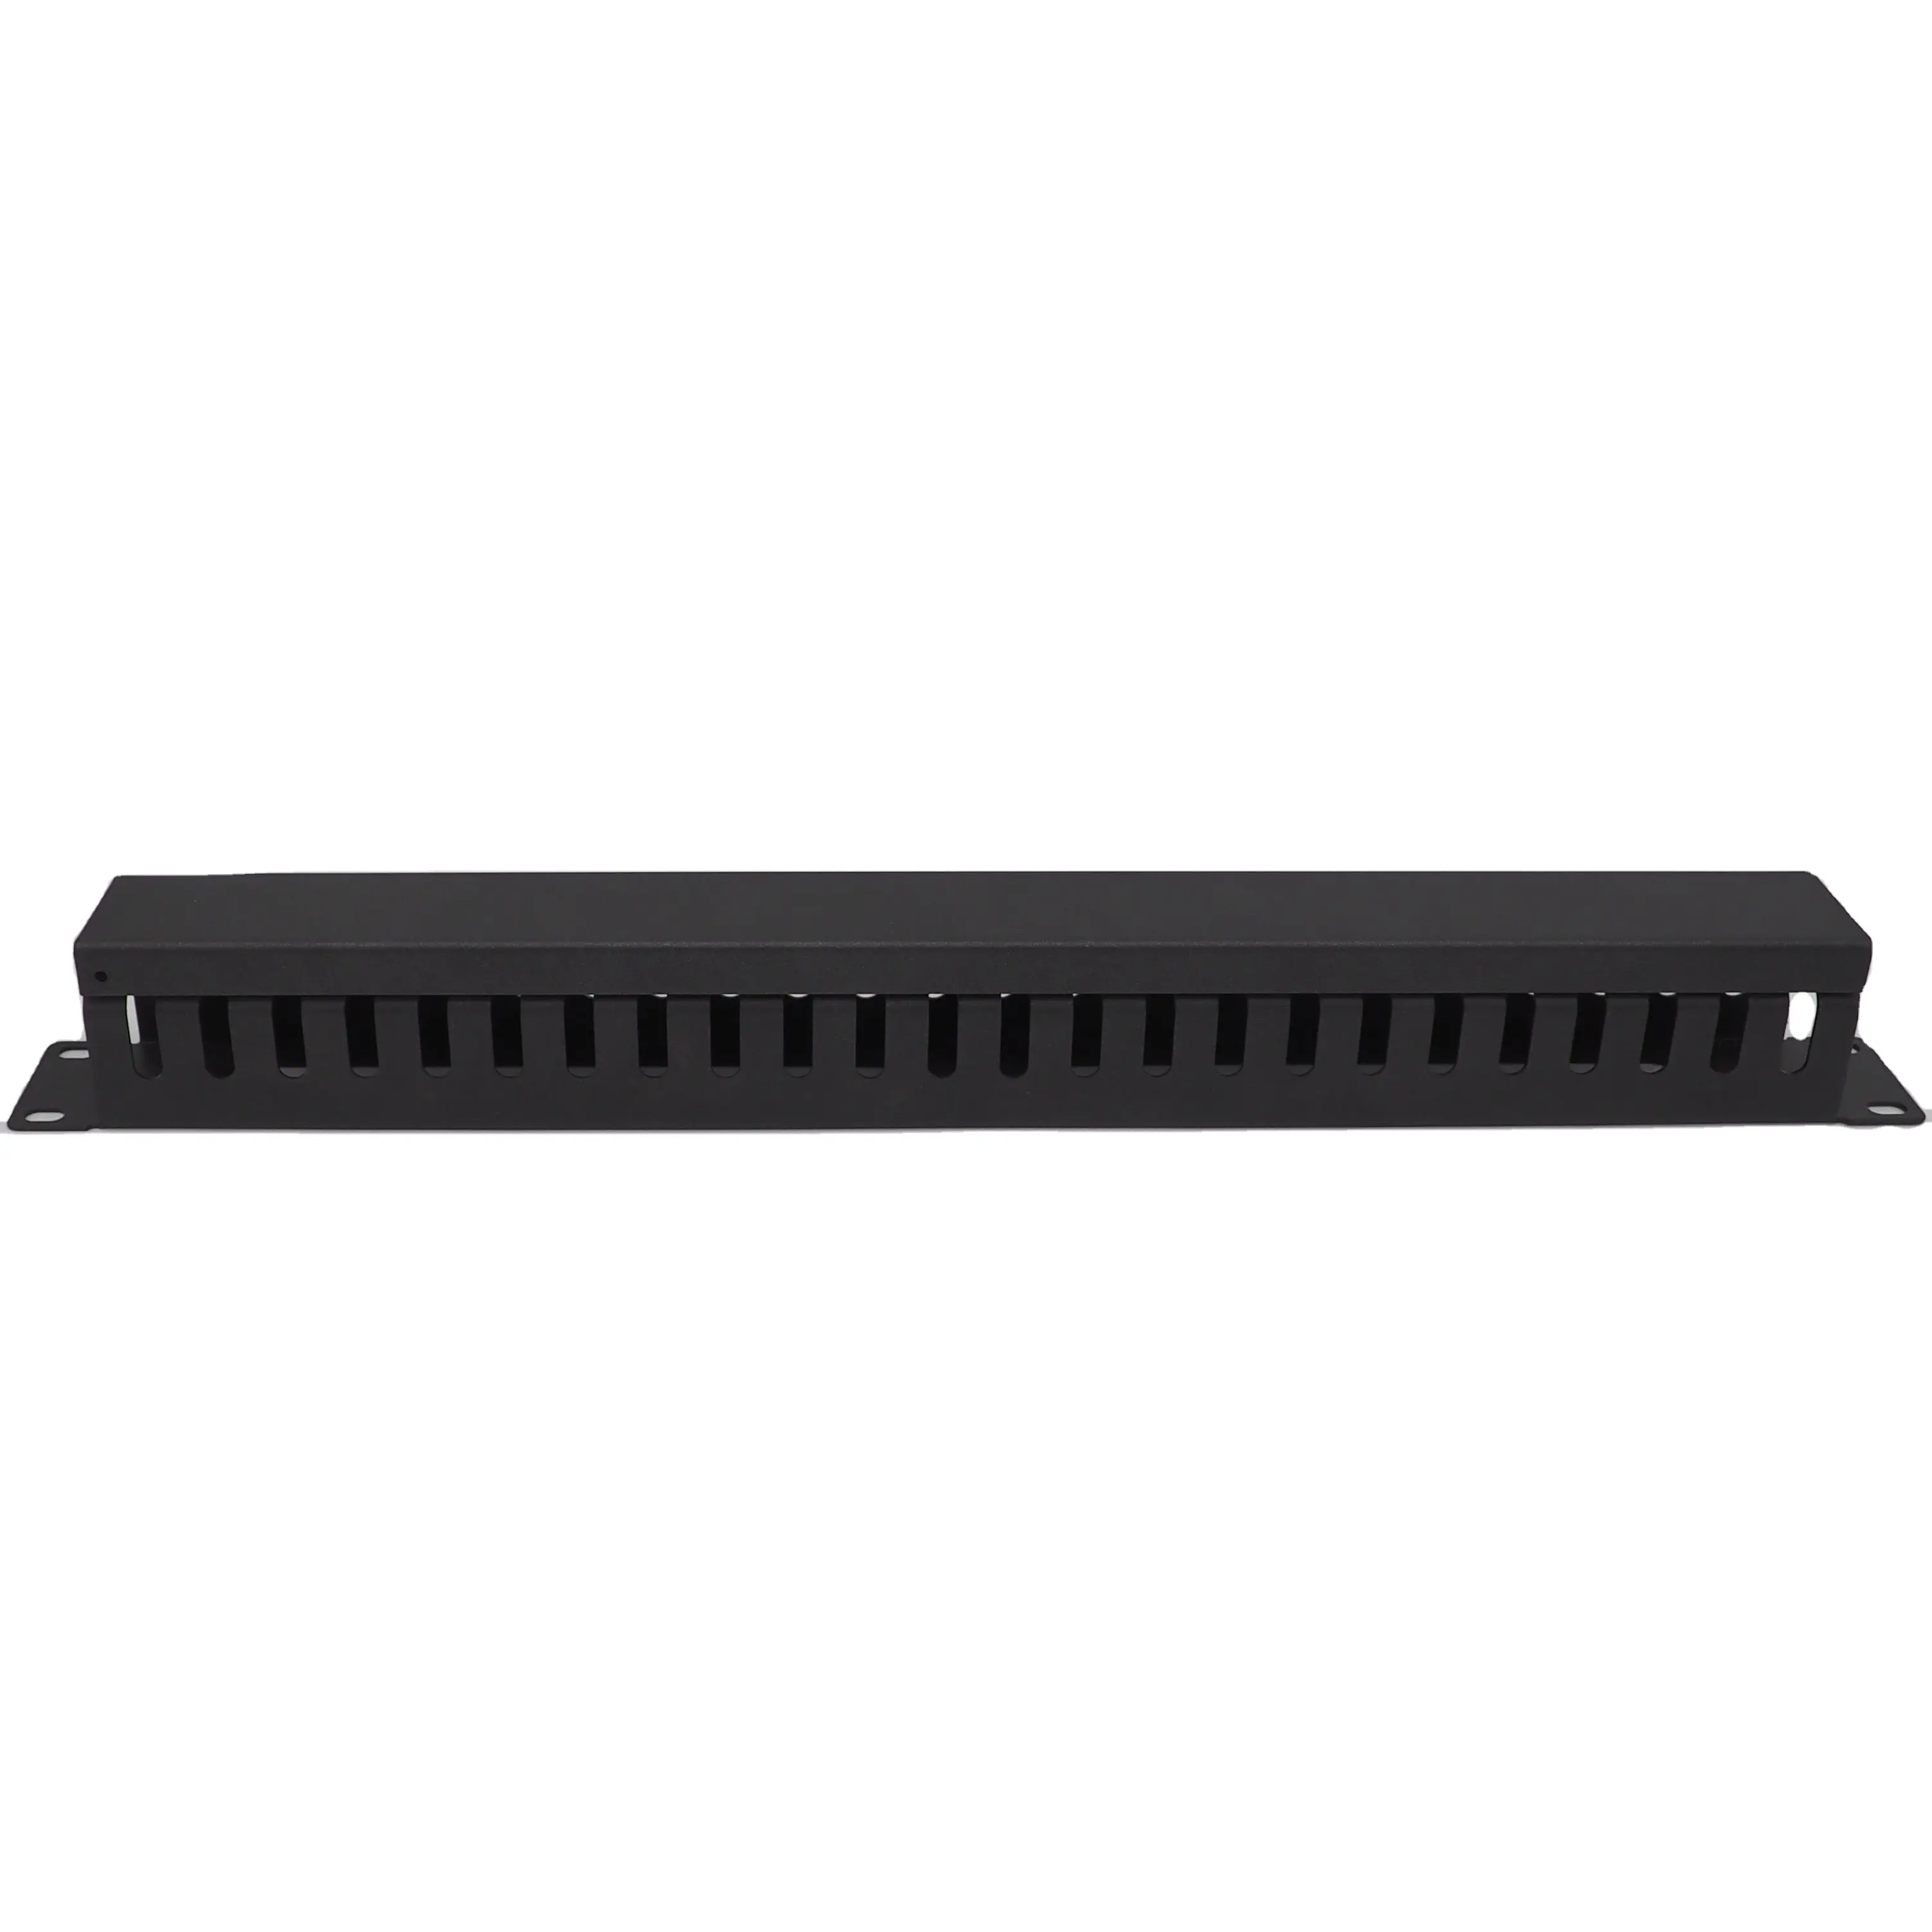 cable management organizer 1U 19 inch 24 port horizontal metal rack mount cable manager